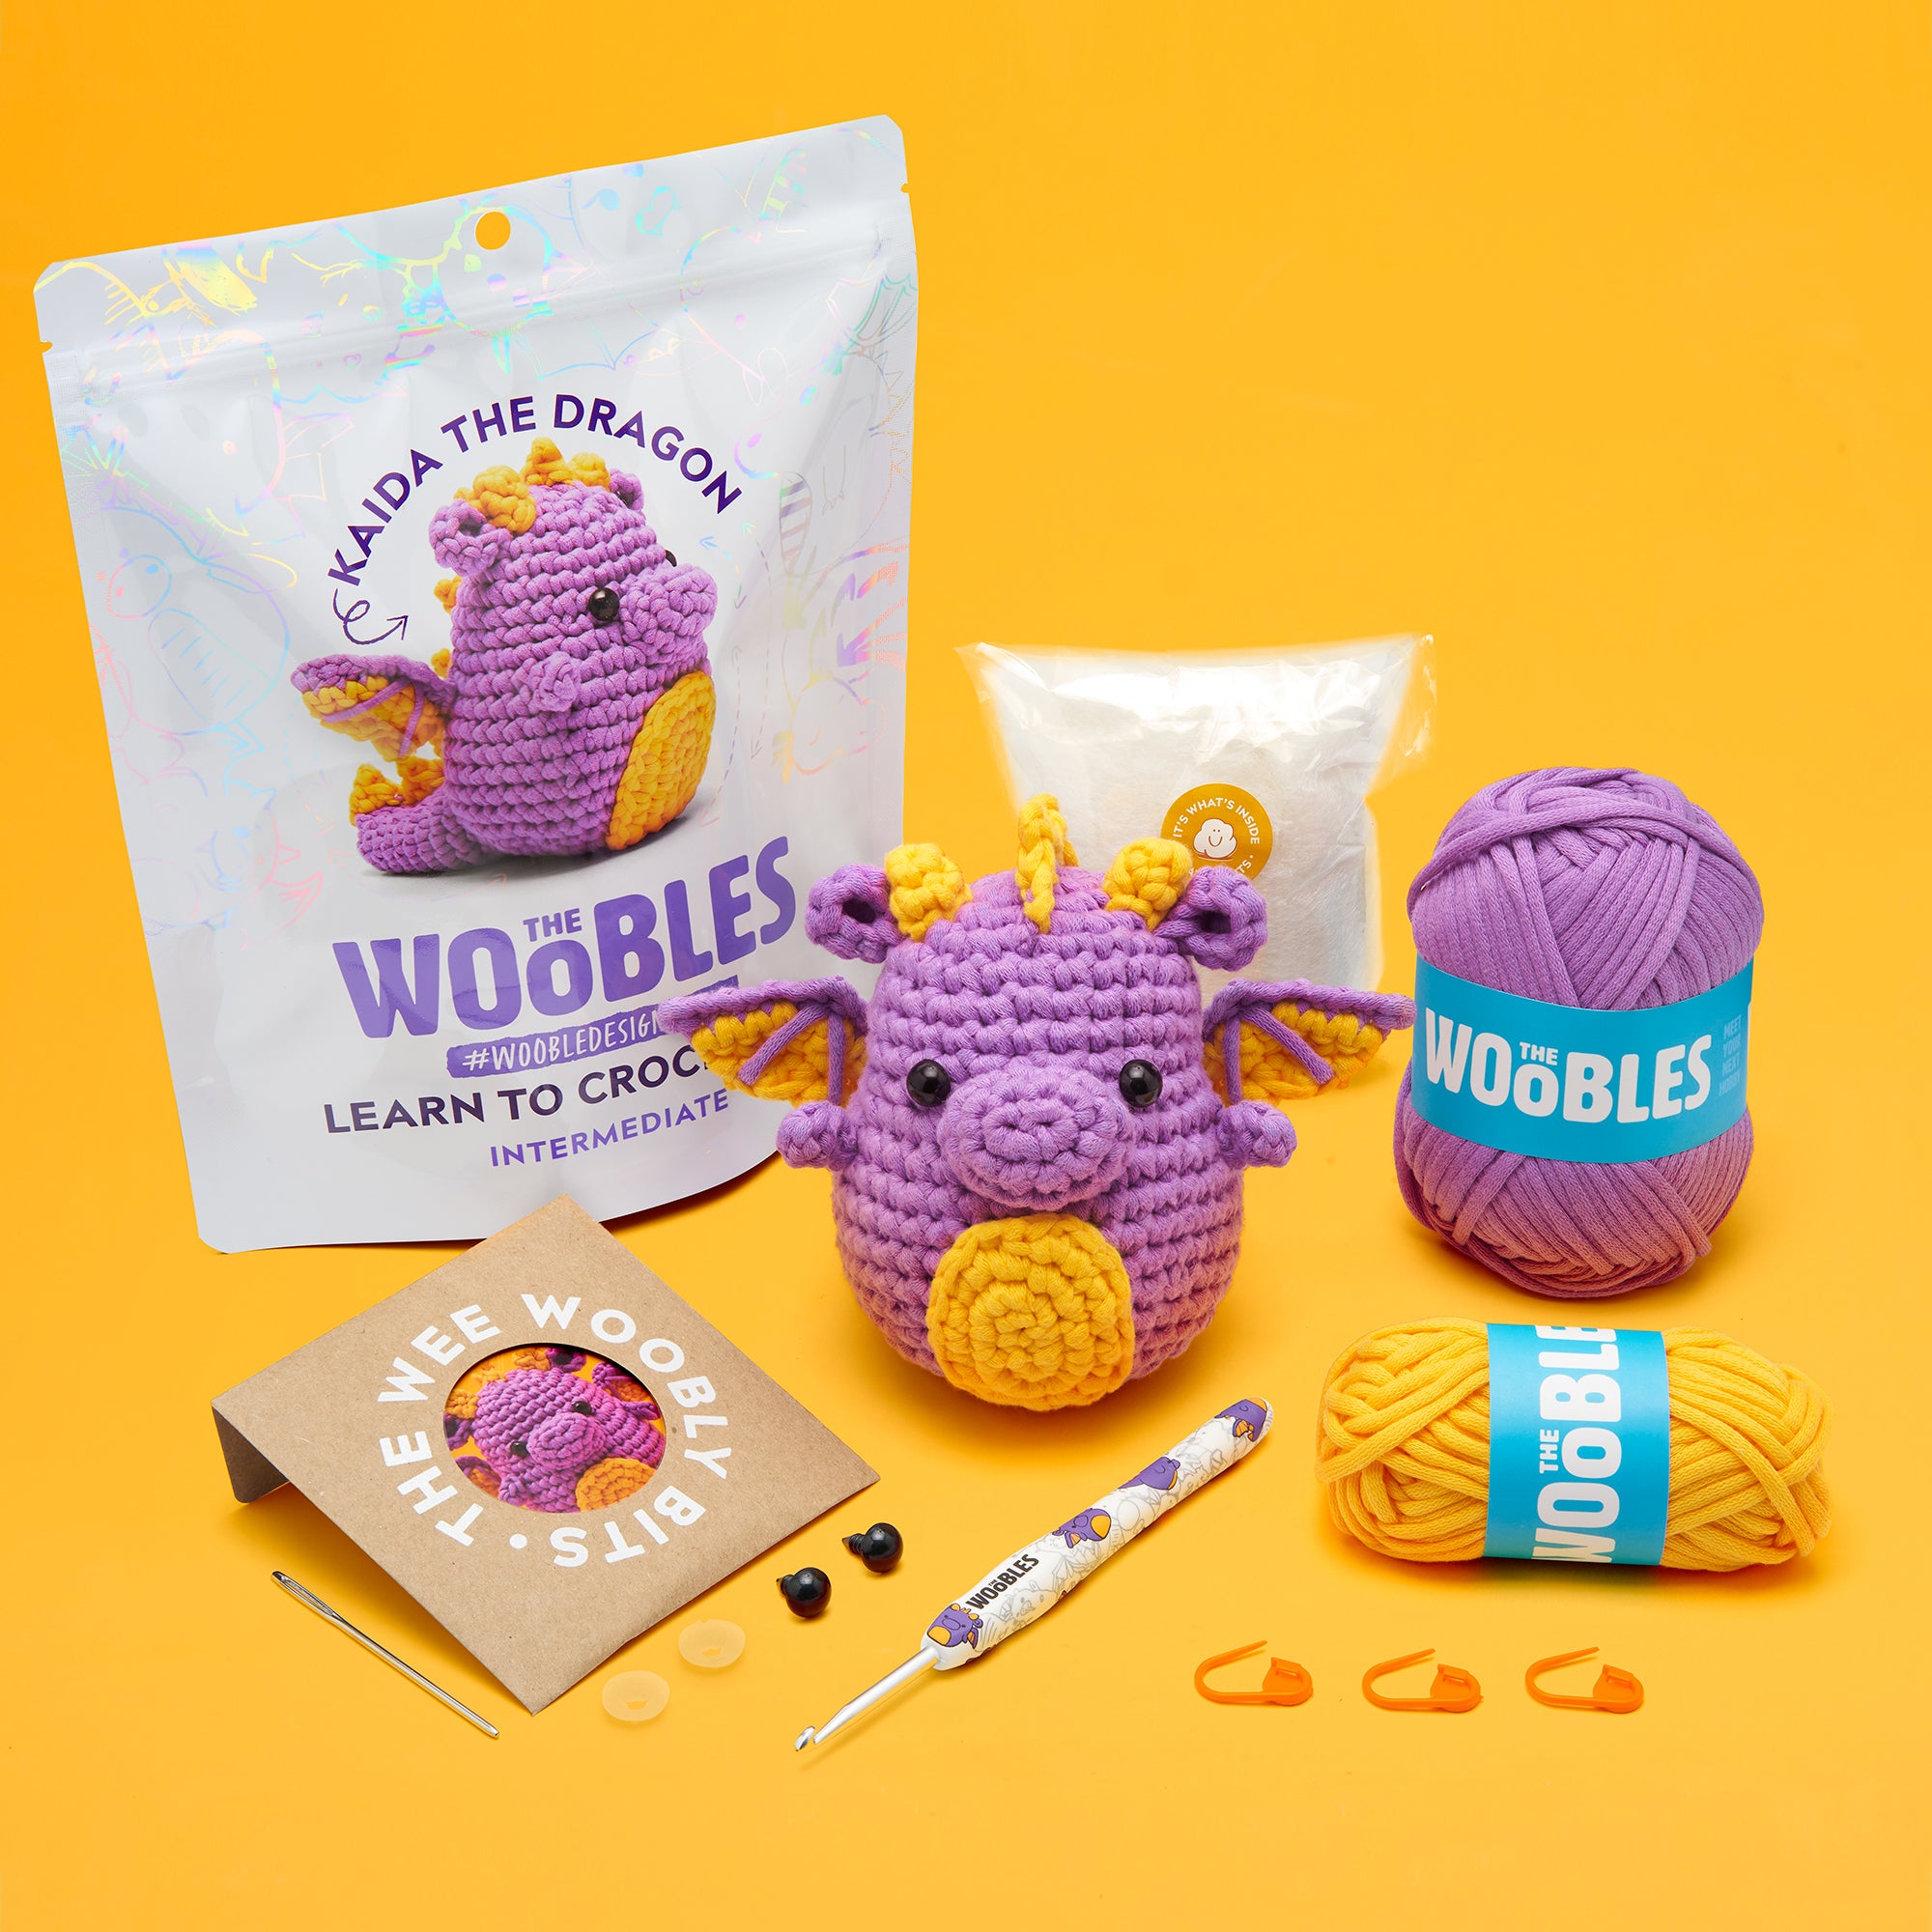 Bought two woobles kits and LOVED them. Got me hooked, I'm so